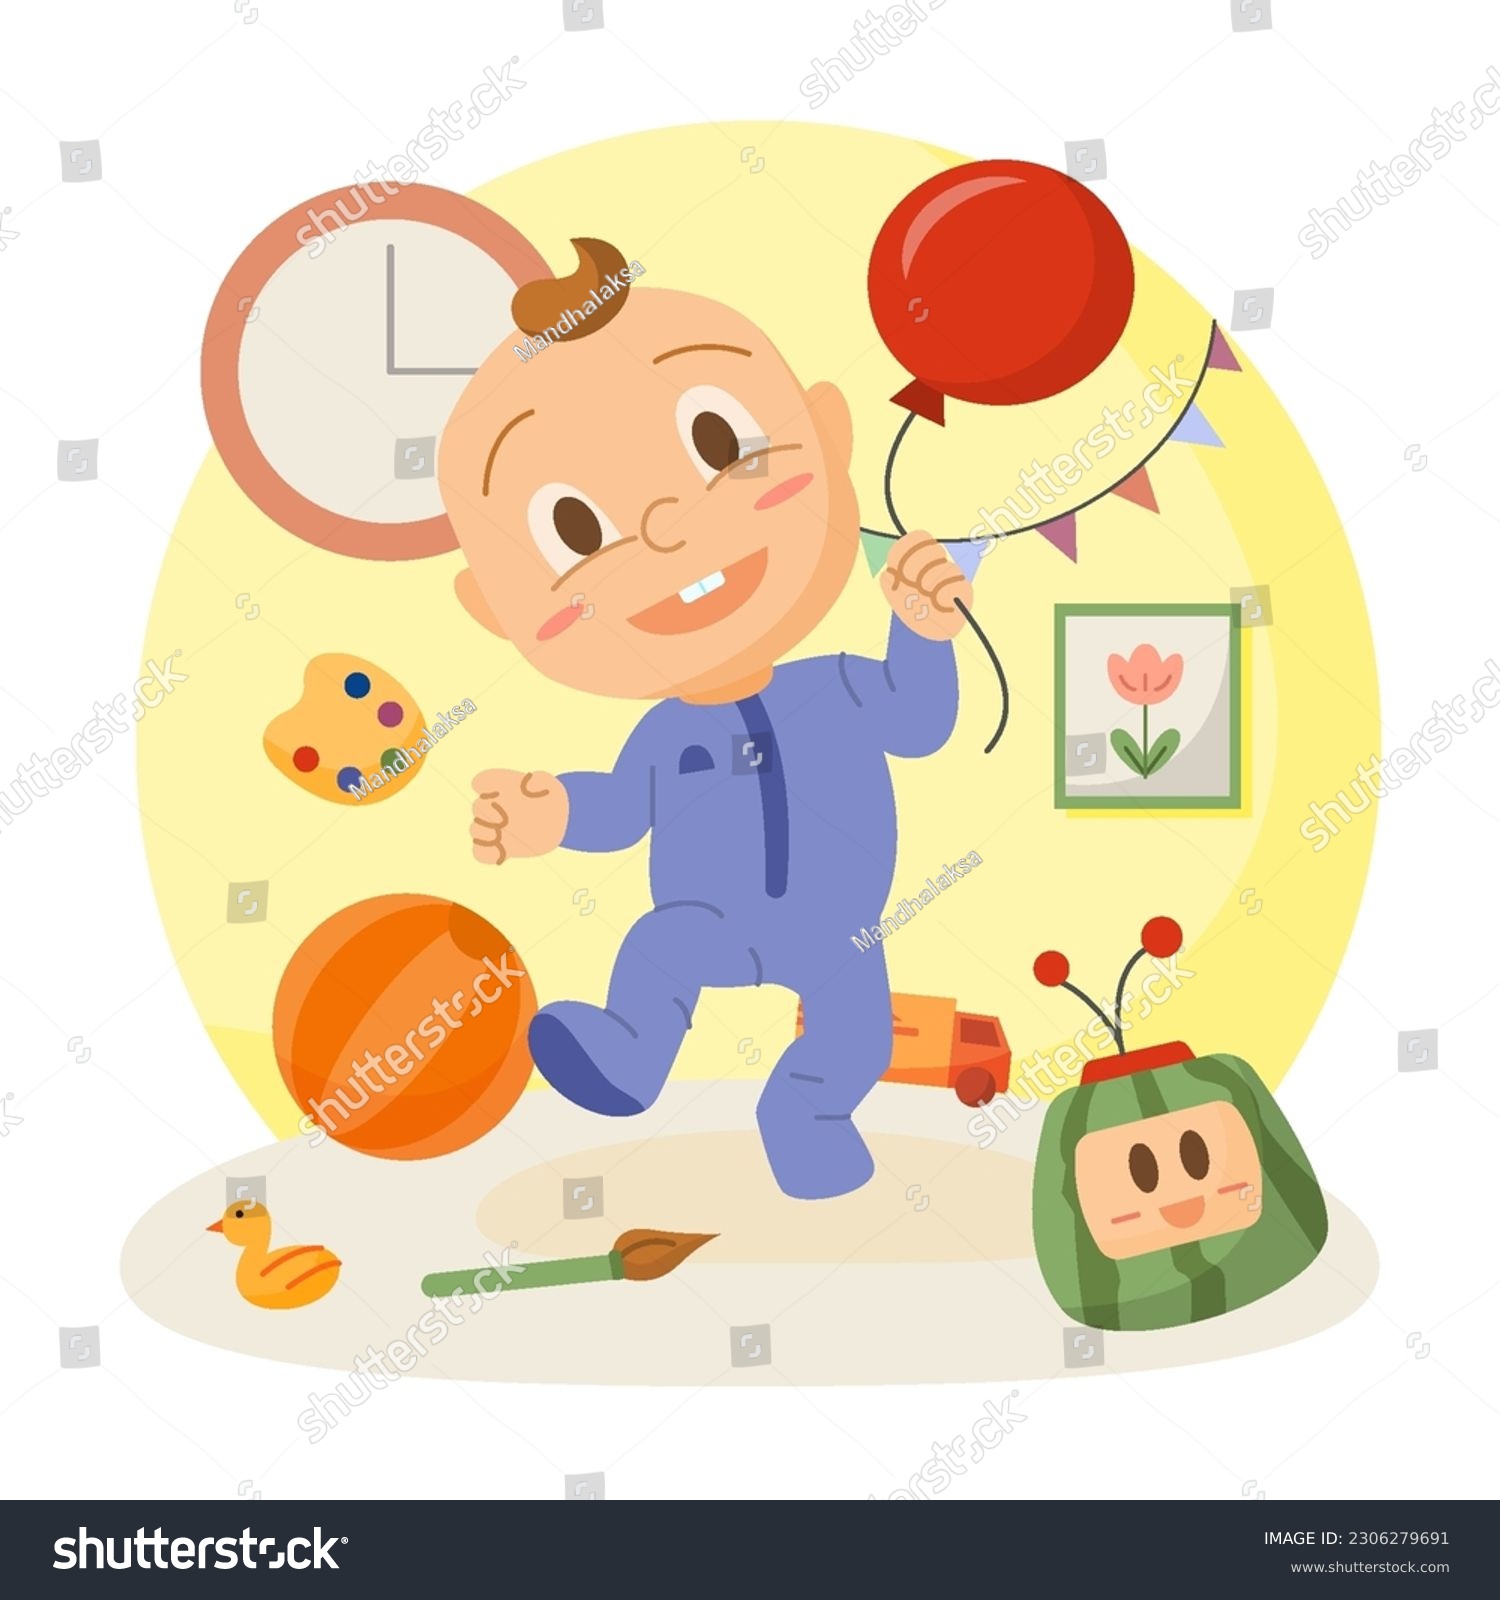 SVG of Cute Baby Boy Playing with Balloon  svg